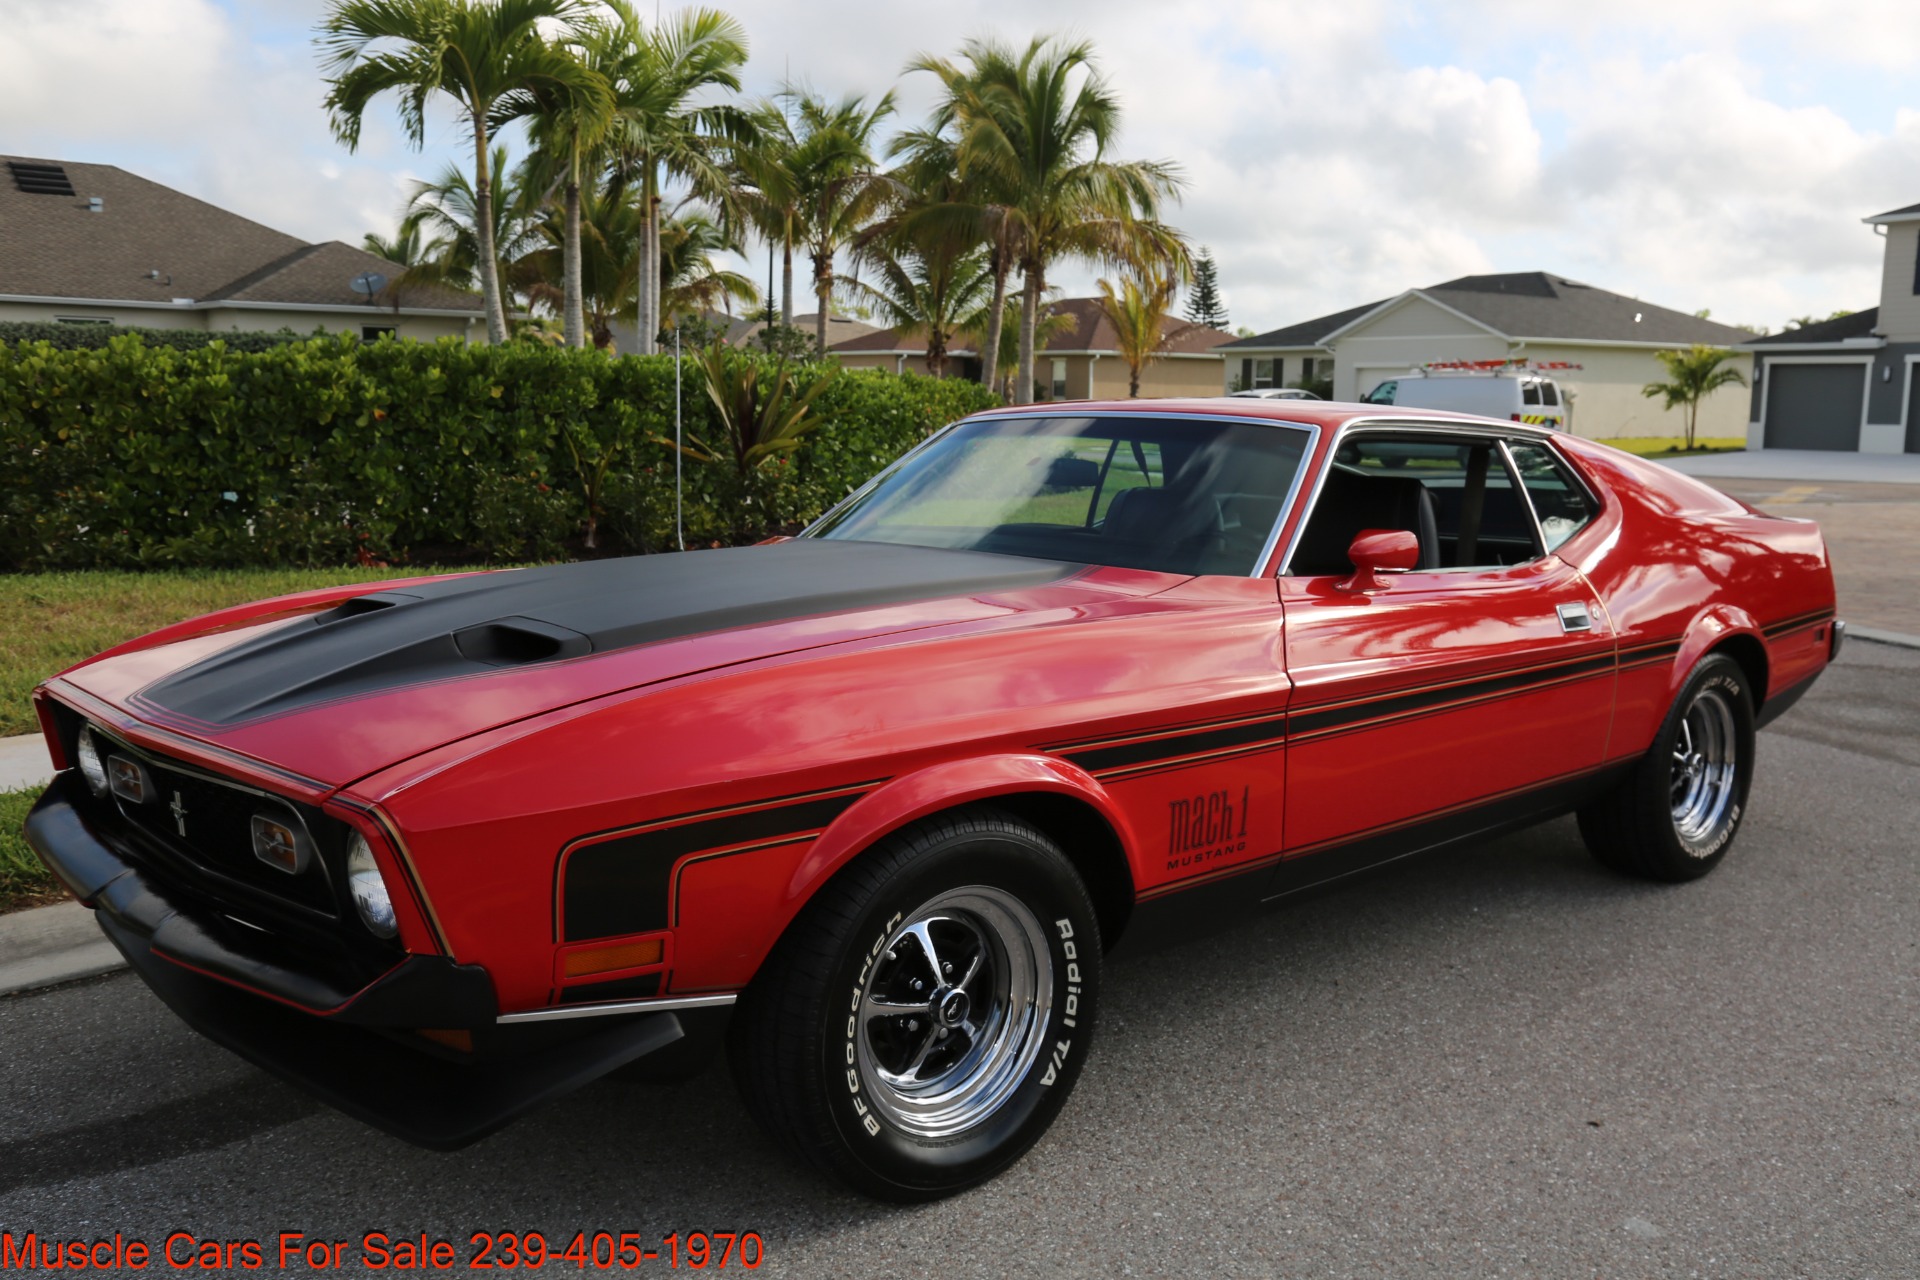 Used 1972 Ford Mustang Mach 1 Mach 1 For Sale ($26,500) | Muscle Cars ...